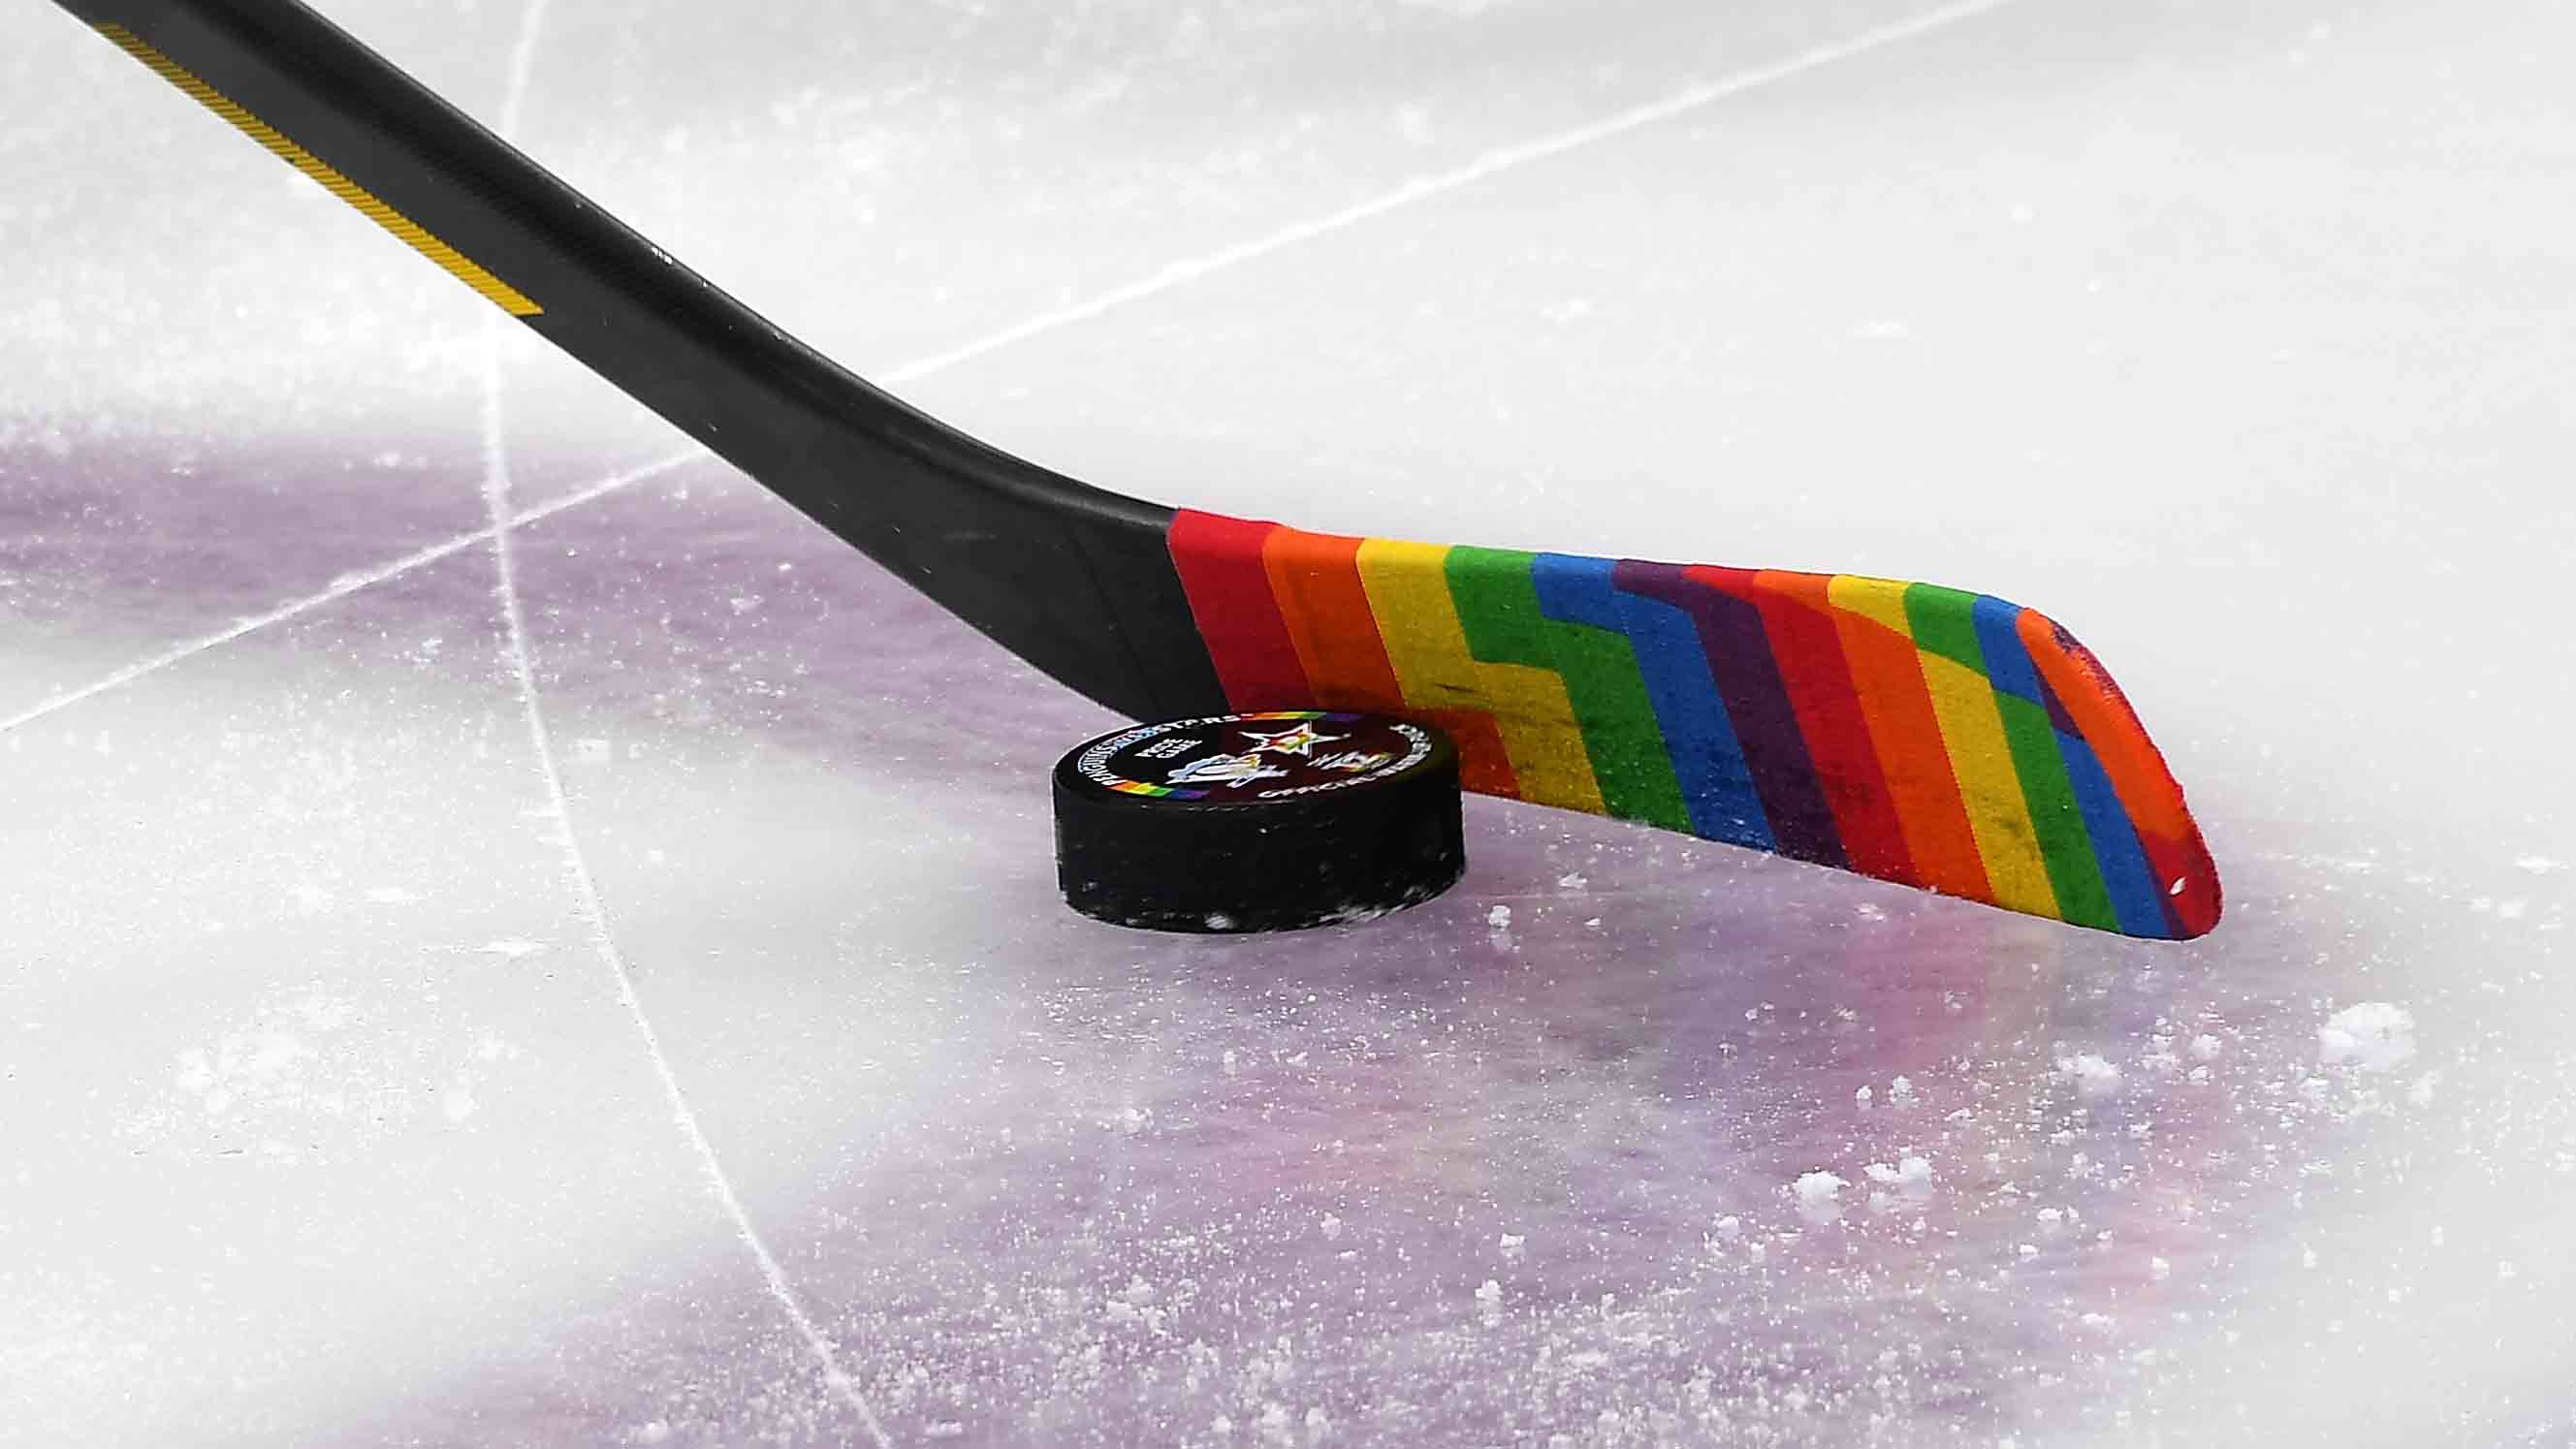 Minnesota Wild players opt out of wearing Pride-themed jerseys